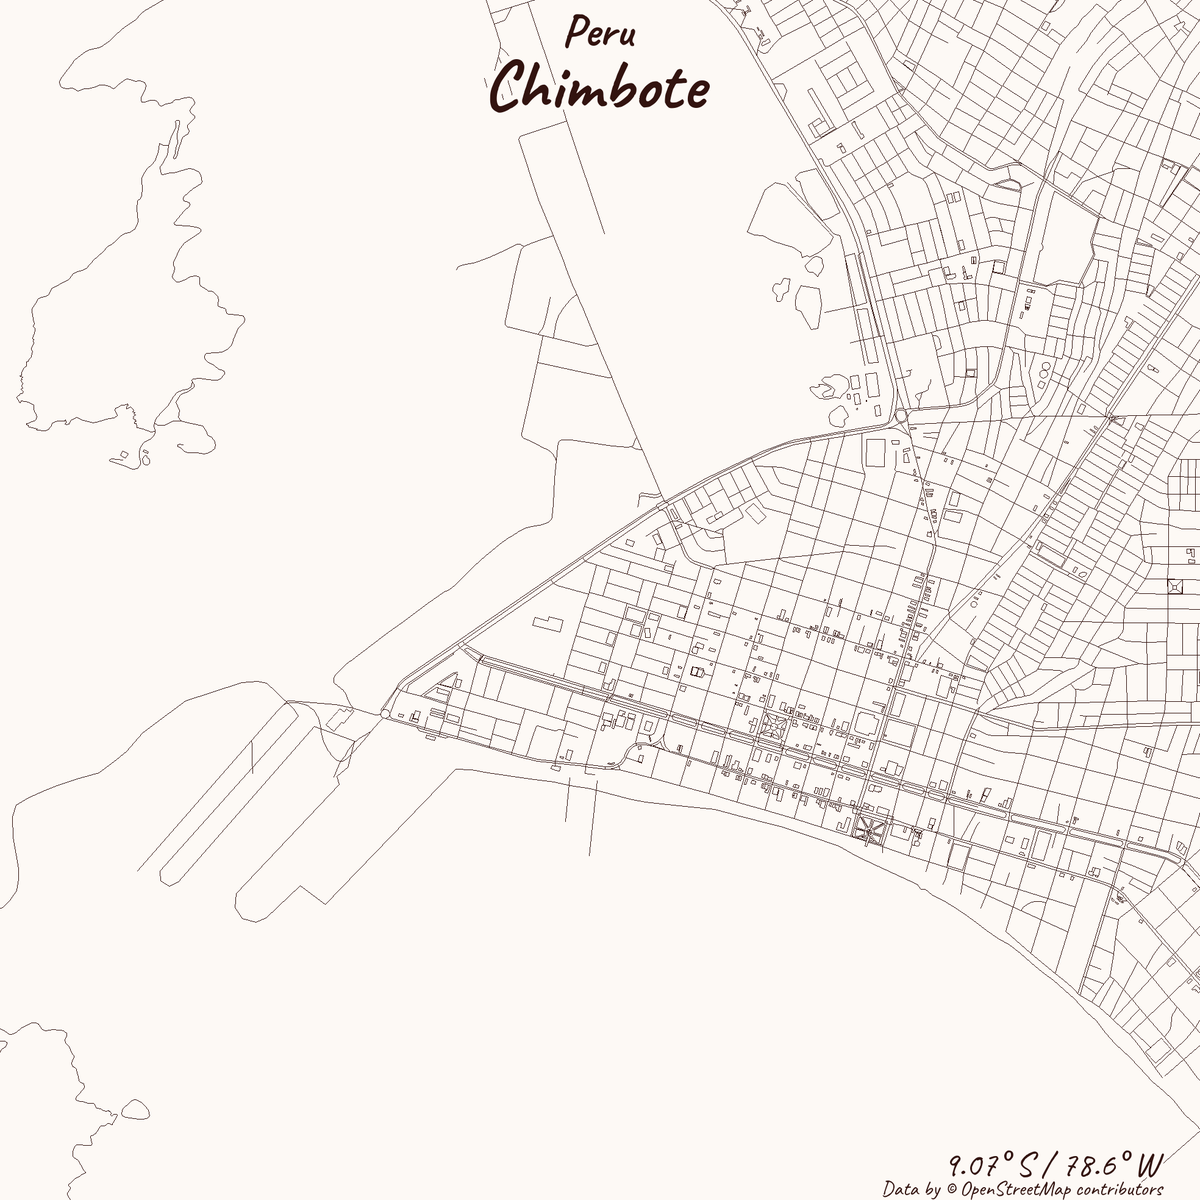 RT @rcityviews: Image of Chimbote, Peru created in #rstats using data from #OpenStreetMap. https://t.co/tTUsIMwRcV